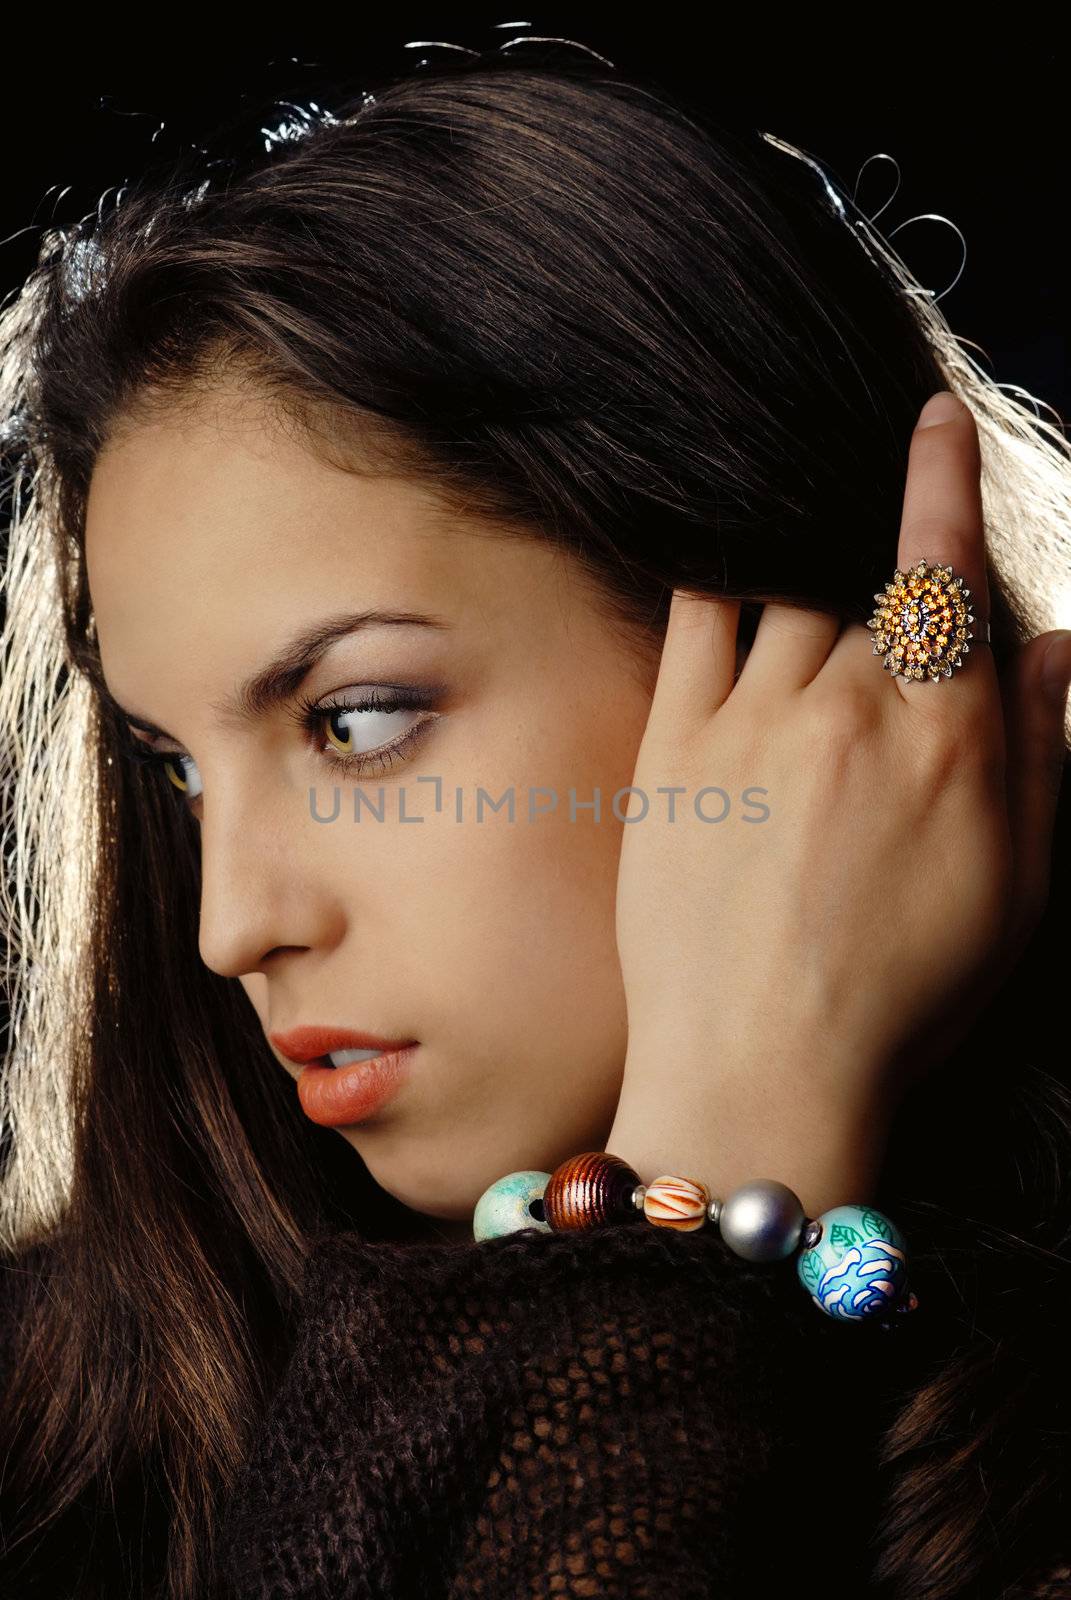 Photo of young model's profile with ring and bracelet